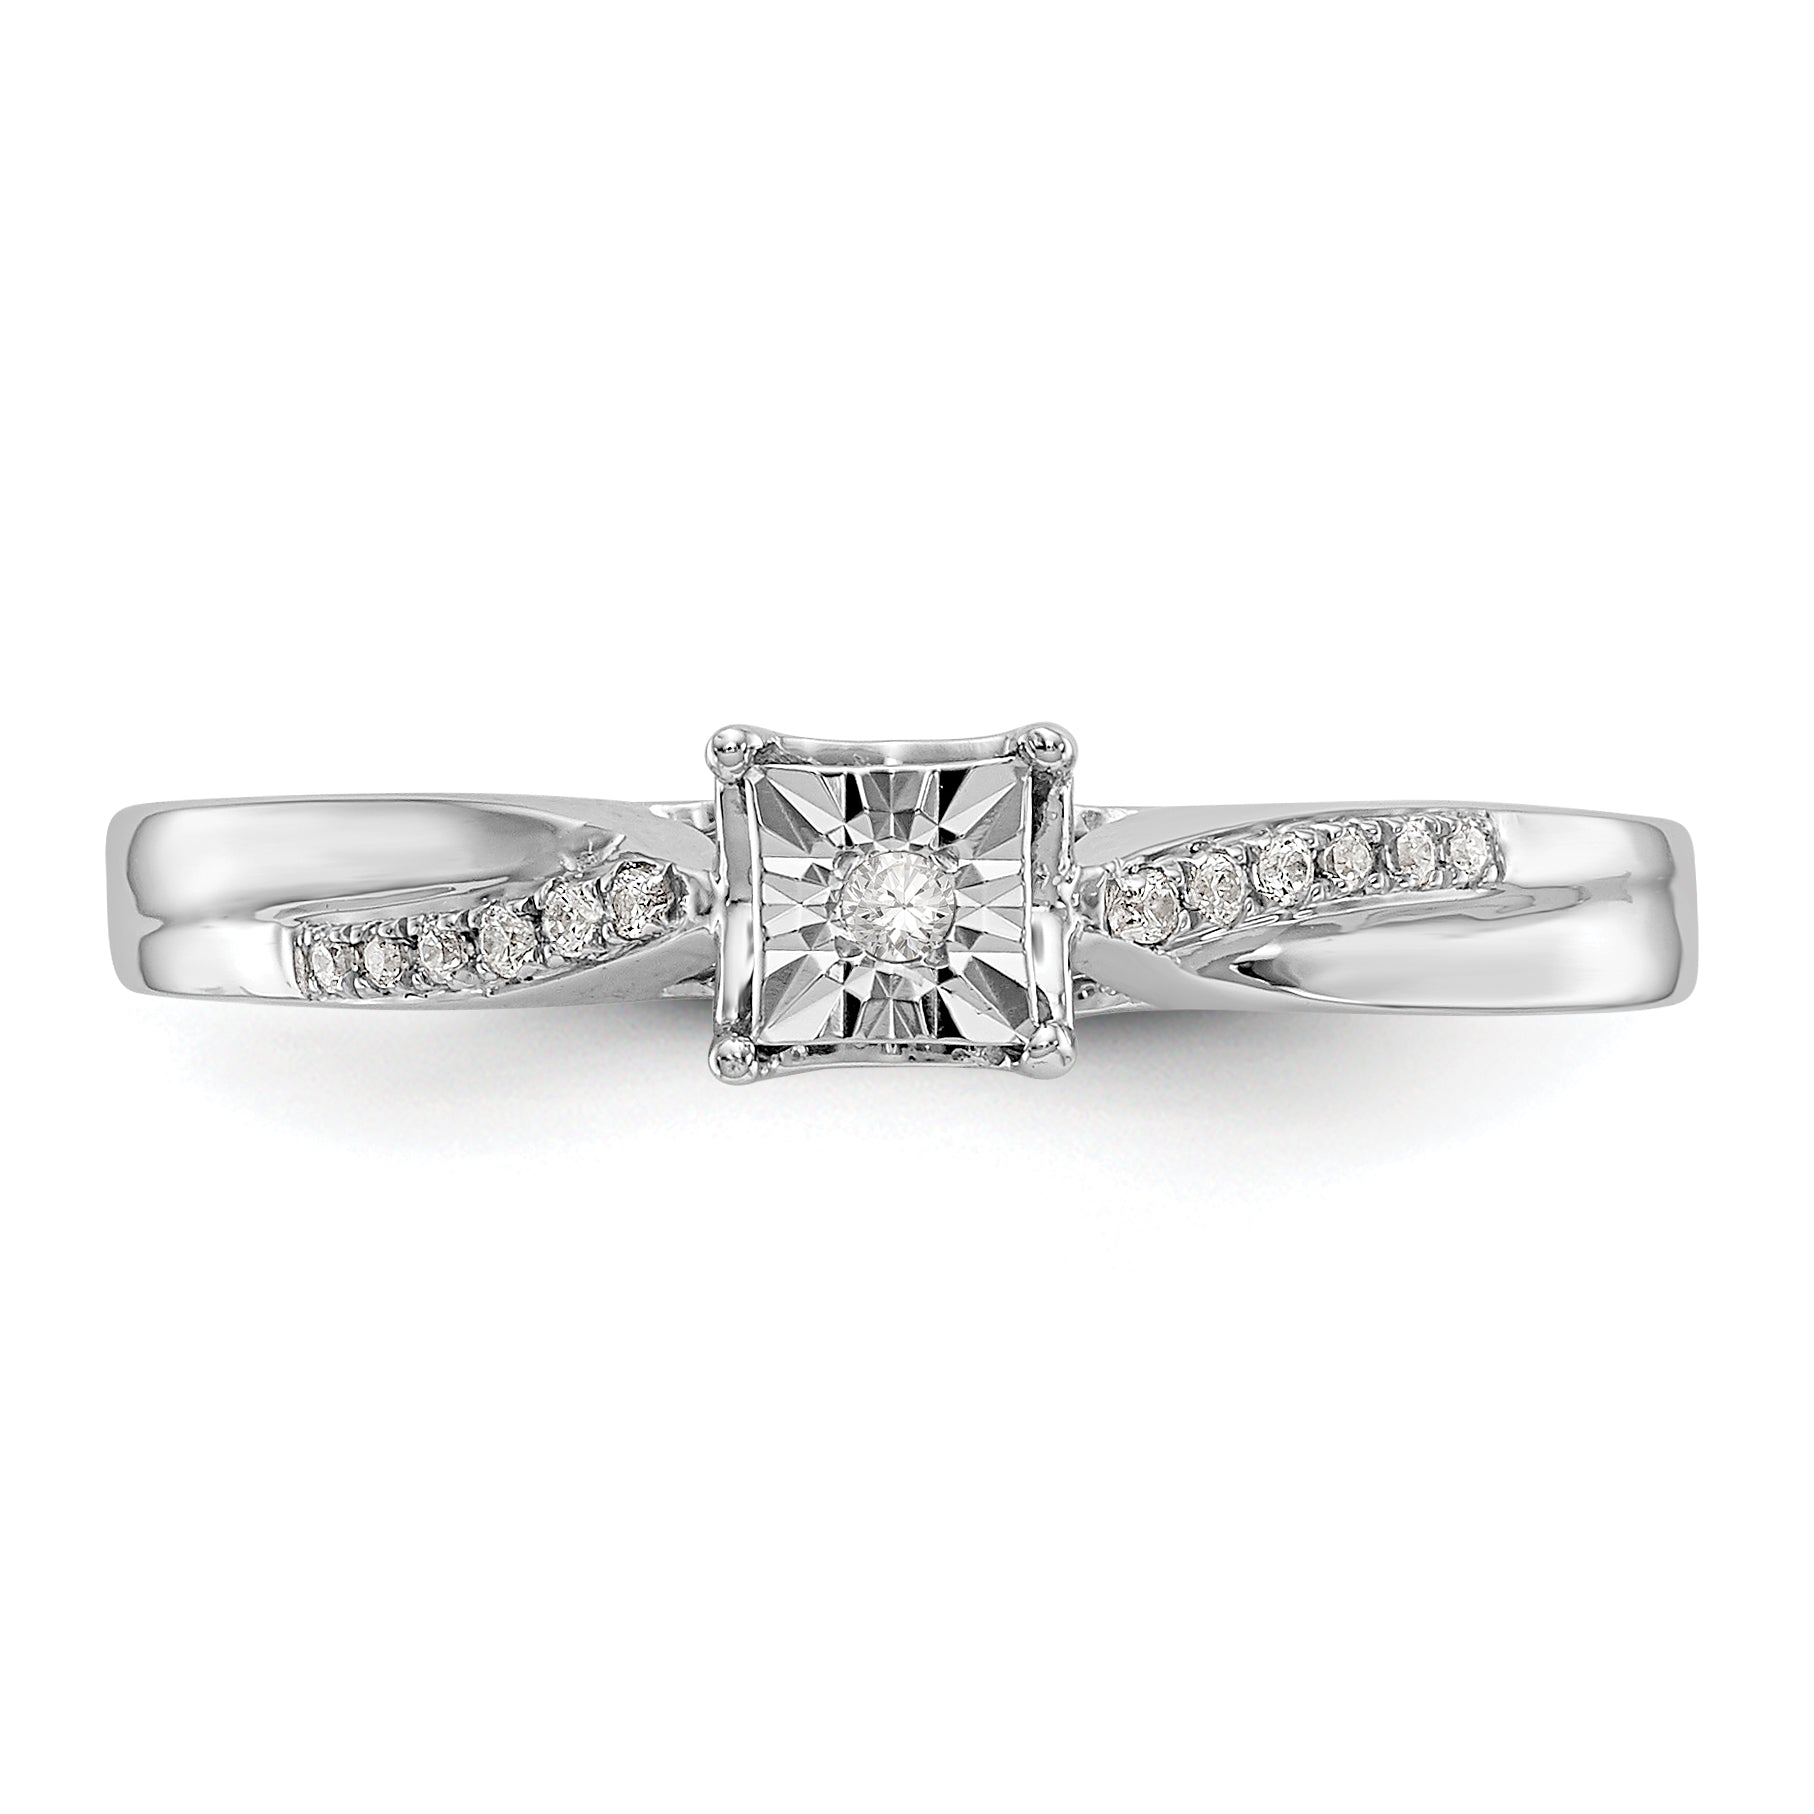 First Promise 14K White Gold Square Illusion 1/20 carat Round Diamond Complete Promise/Engagement Ring